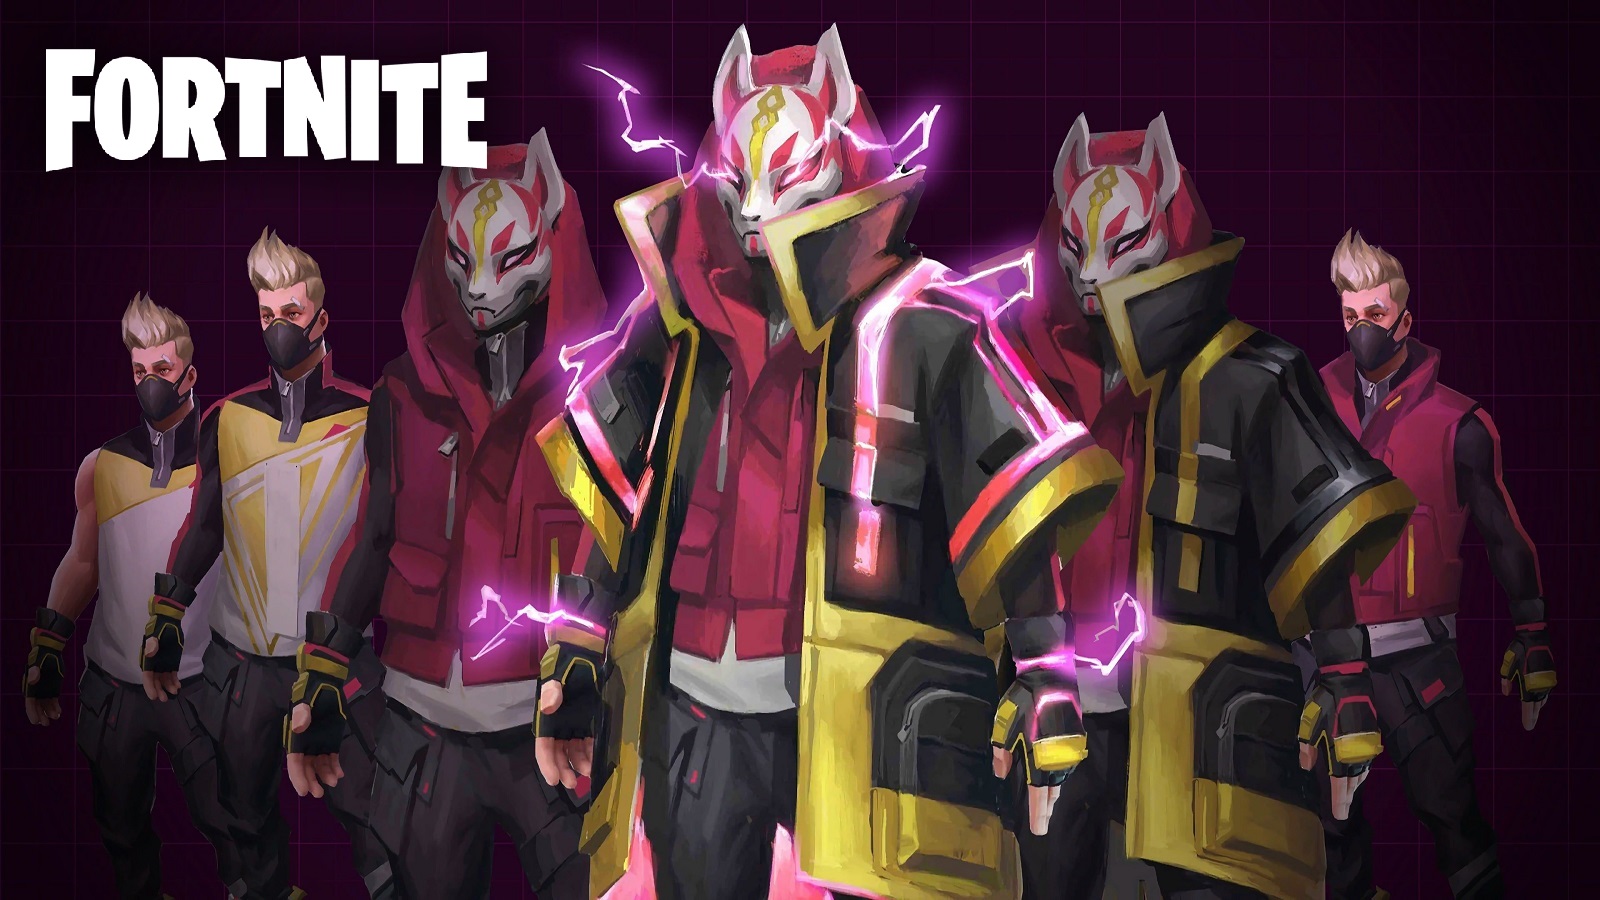 Fortnite tease exclusive new Drift Crew skin with Fox Clan hints